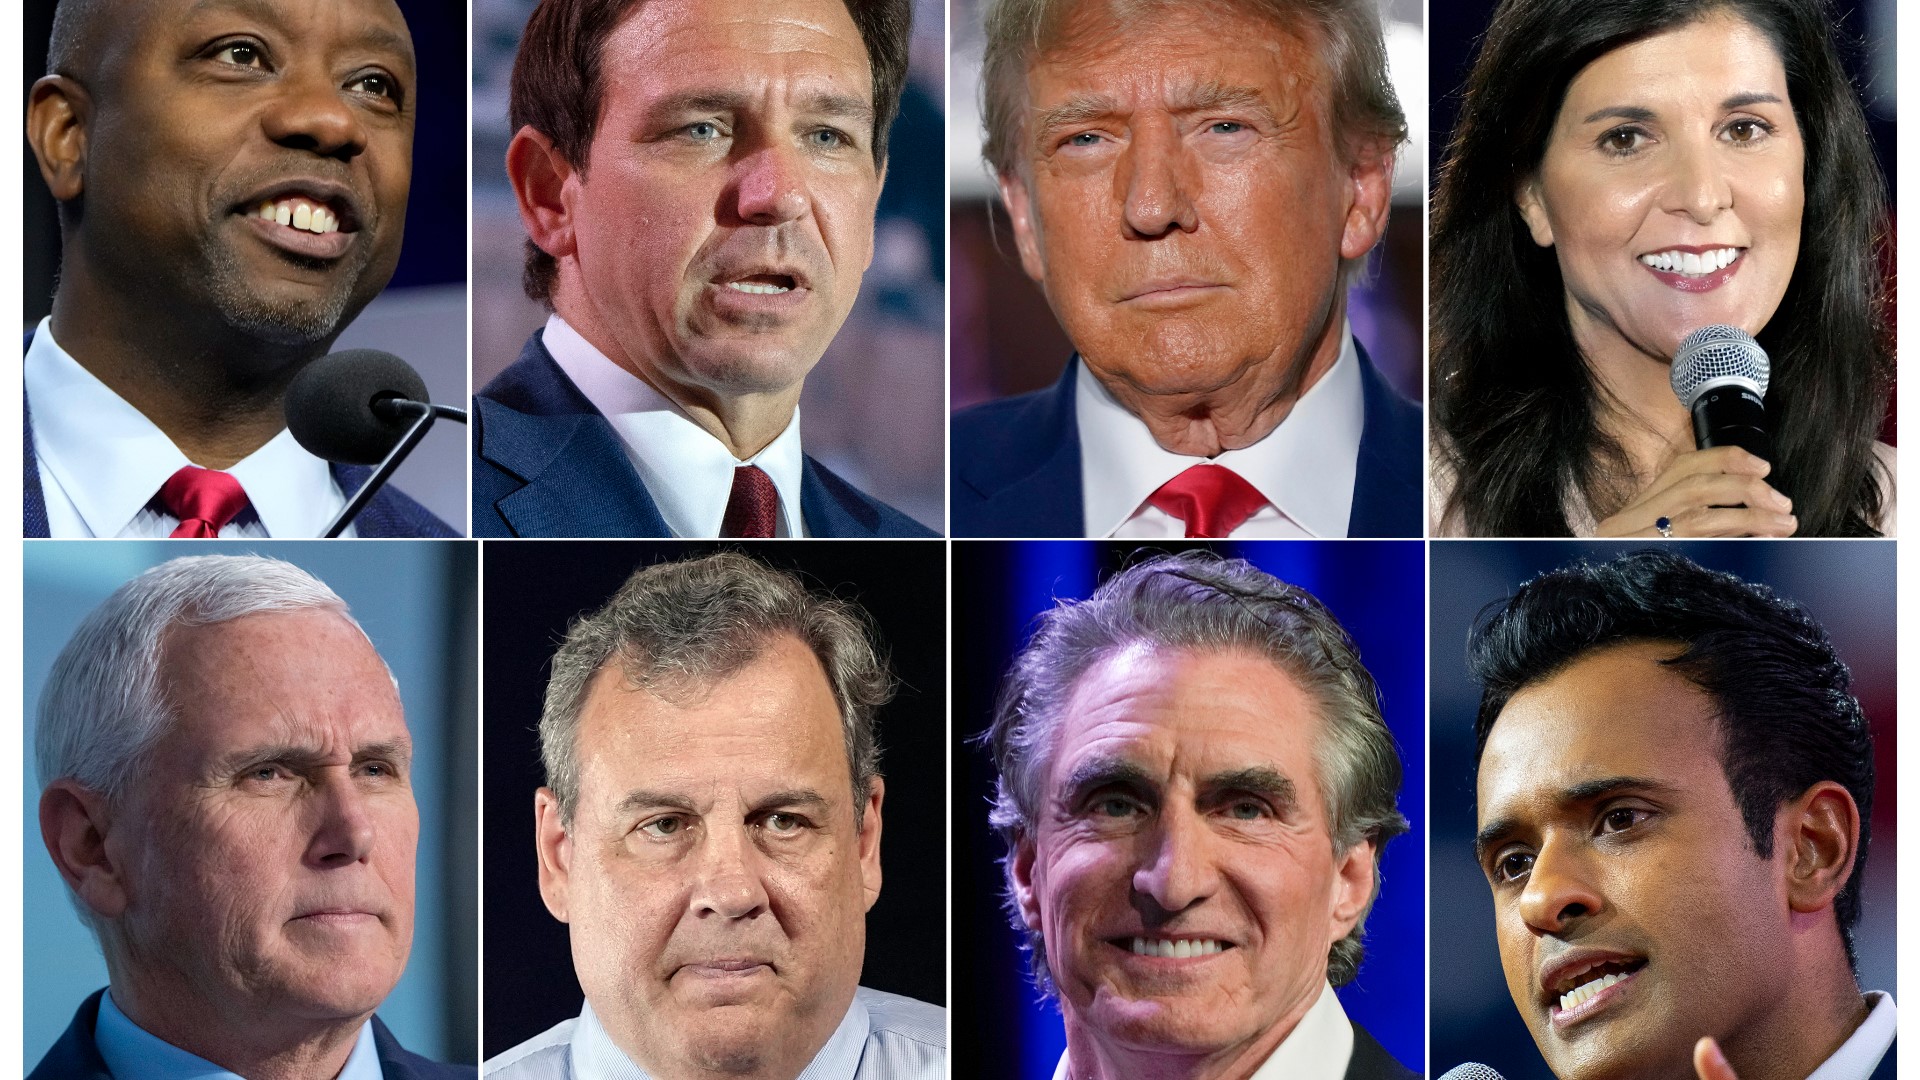 With the first Republican presidential debate of the 2024 campaign fast approaching, eight candidates say they have met the qualifications for a spot on stage.